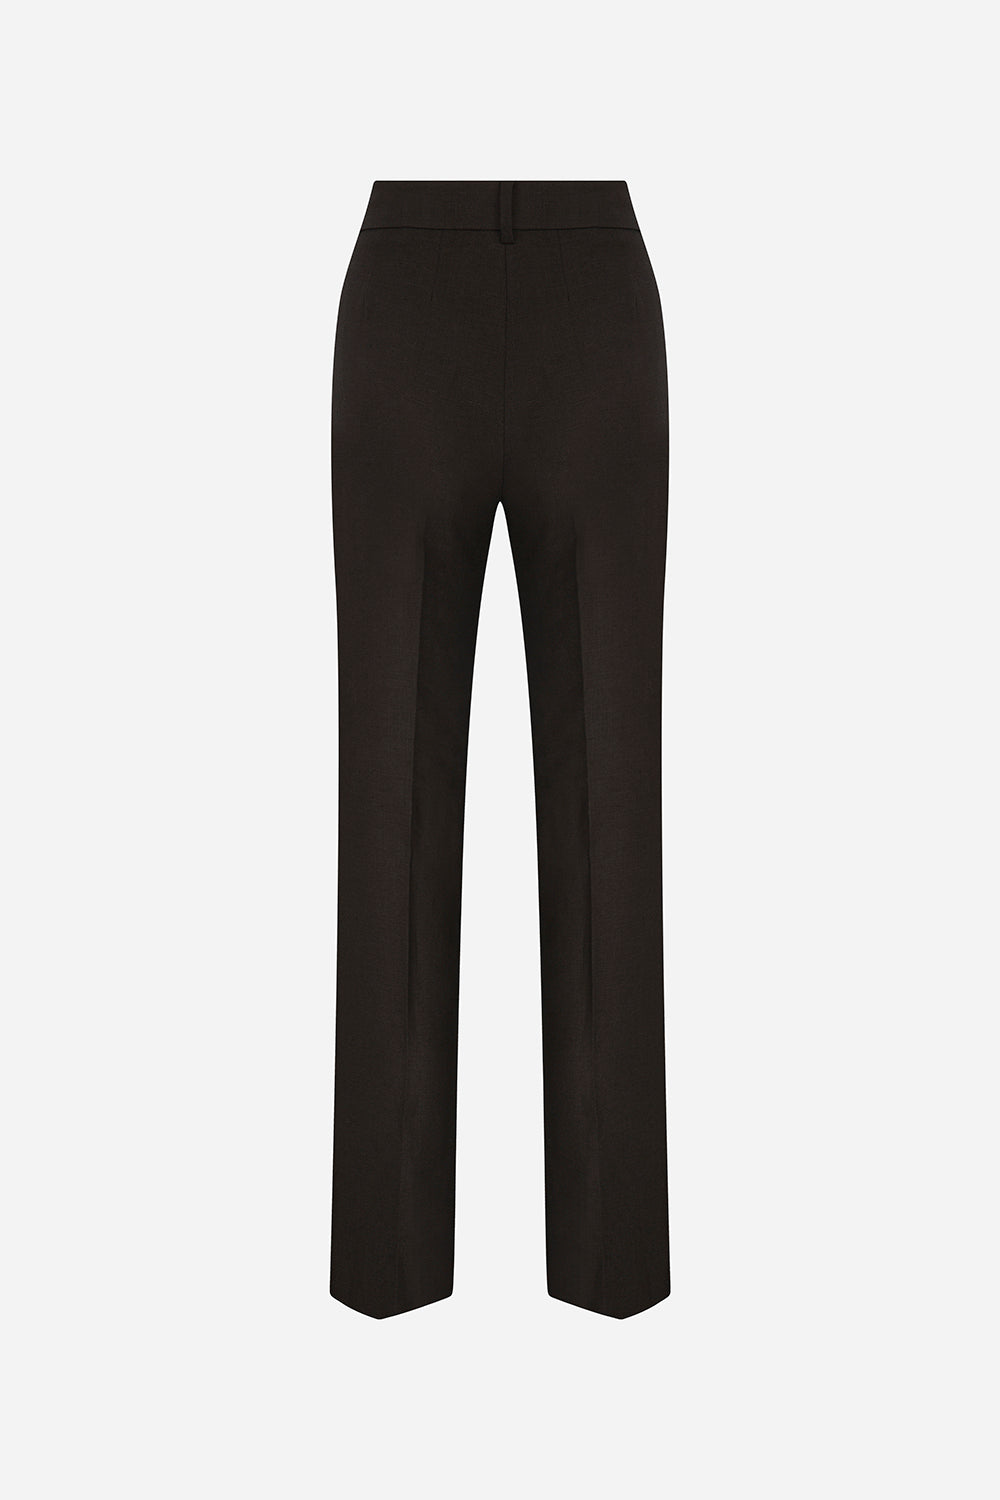 Molly - Double Pleated Linen Trousers